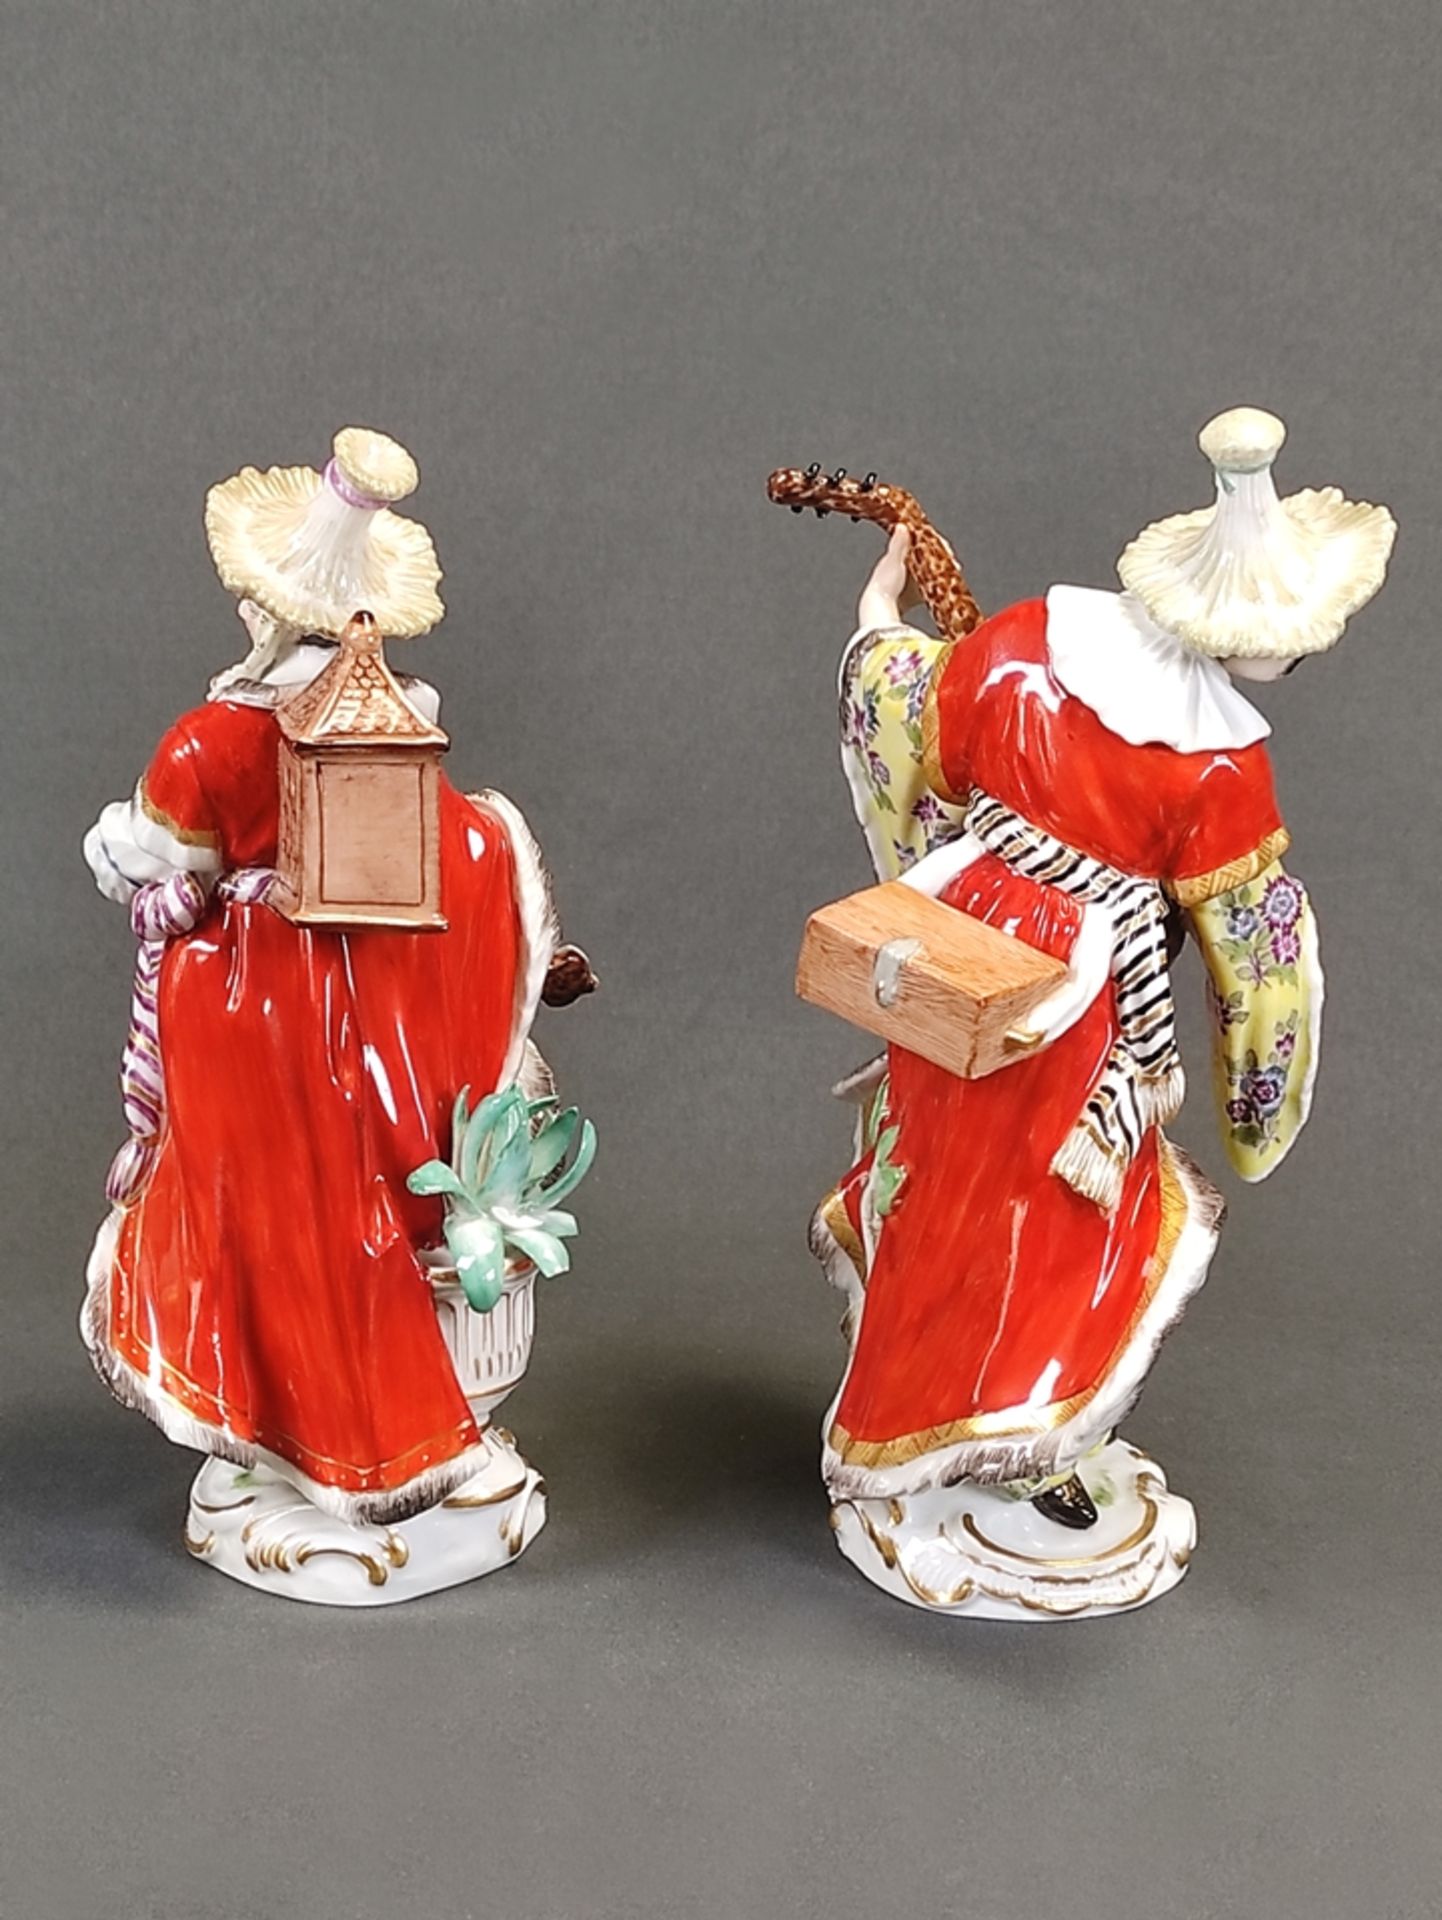 Porcelain pair "Malabarian man with lute" and "Malabarian woman with hurdy-gurdy", Meissen sword ma - Image 2 of 5